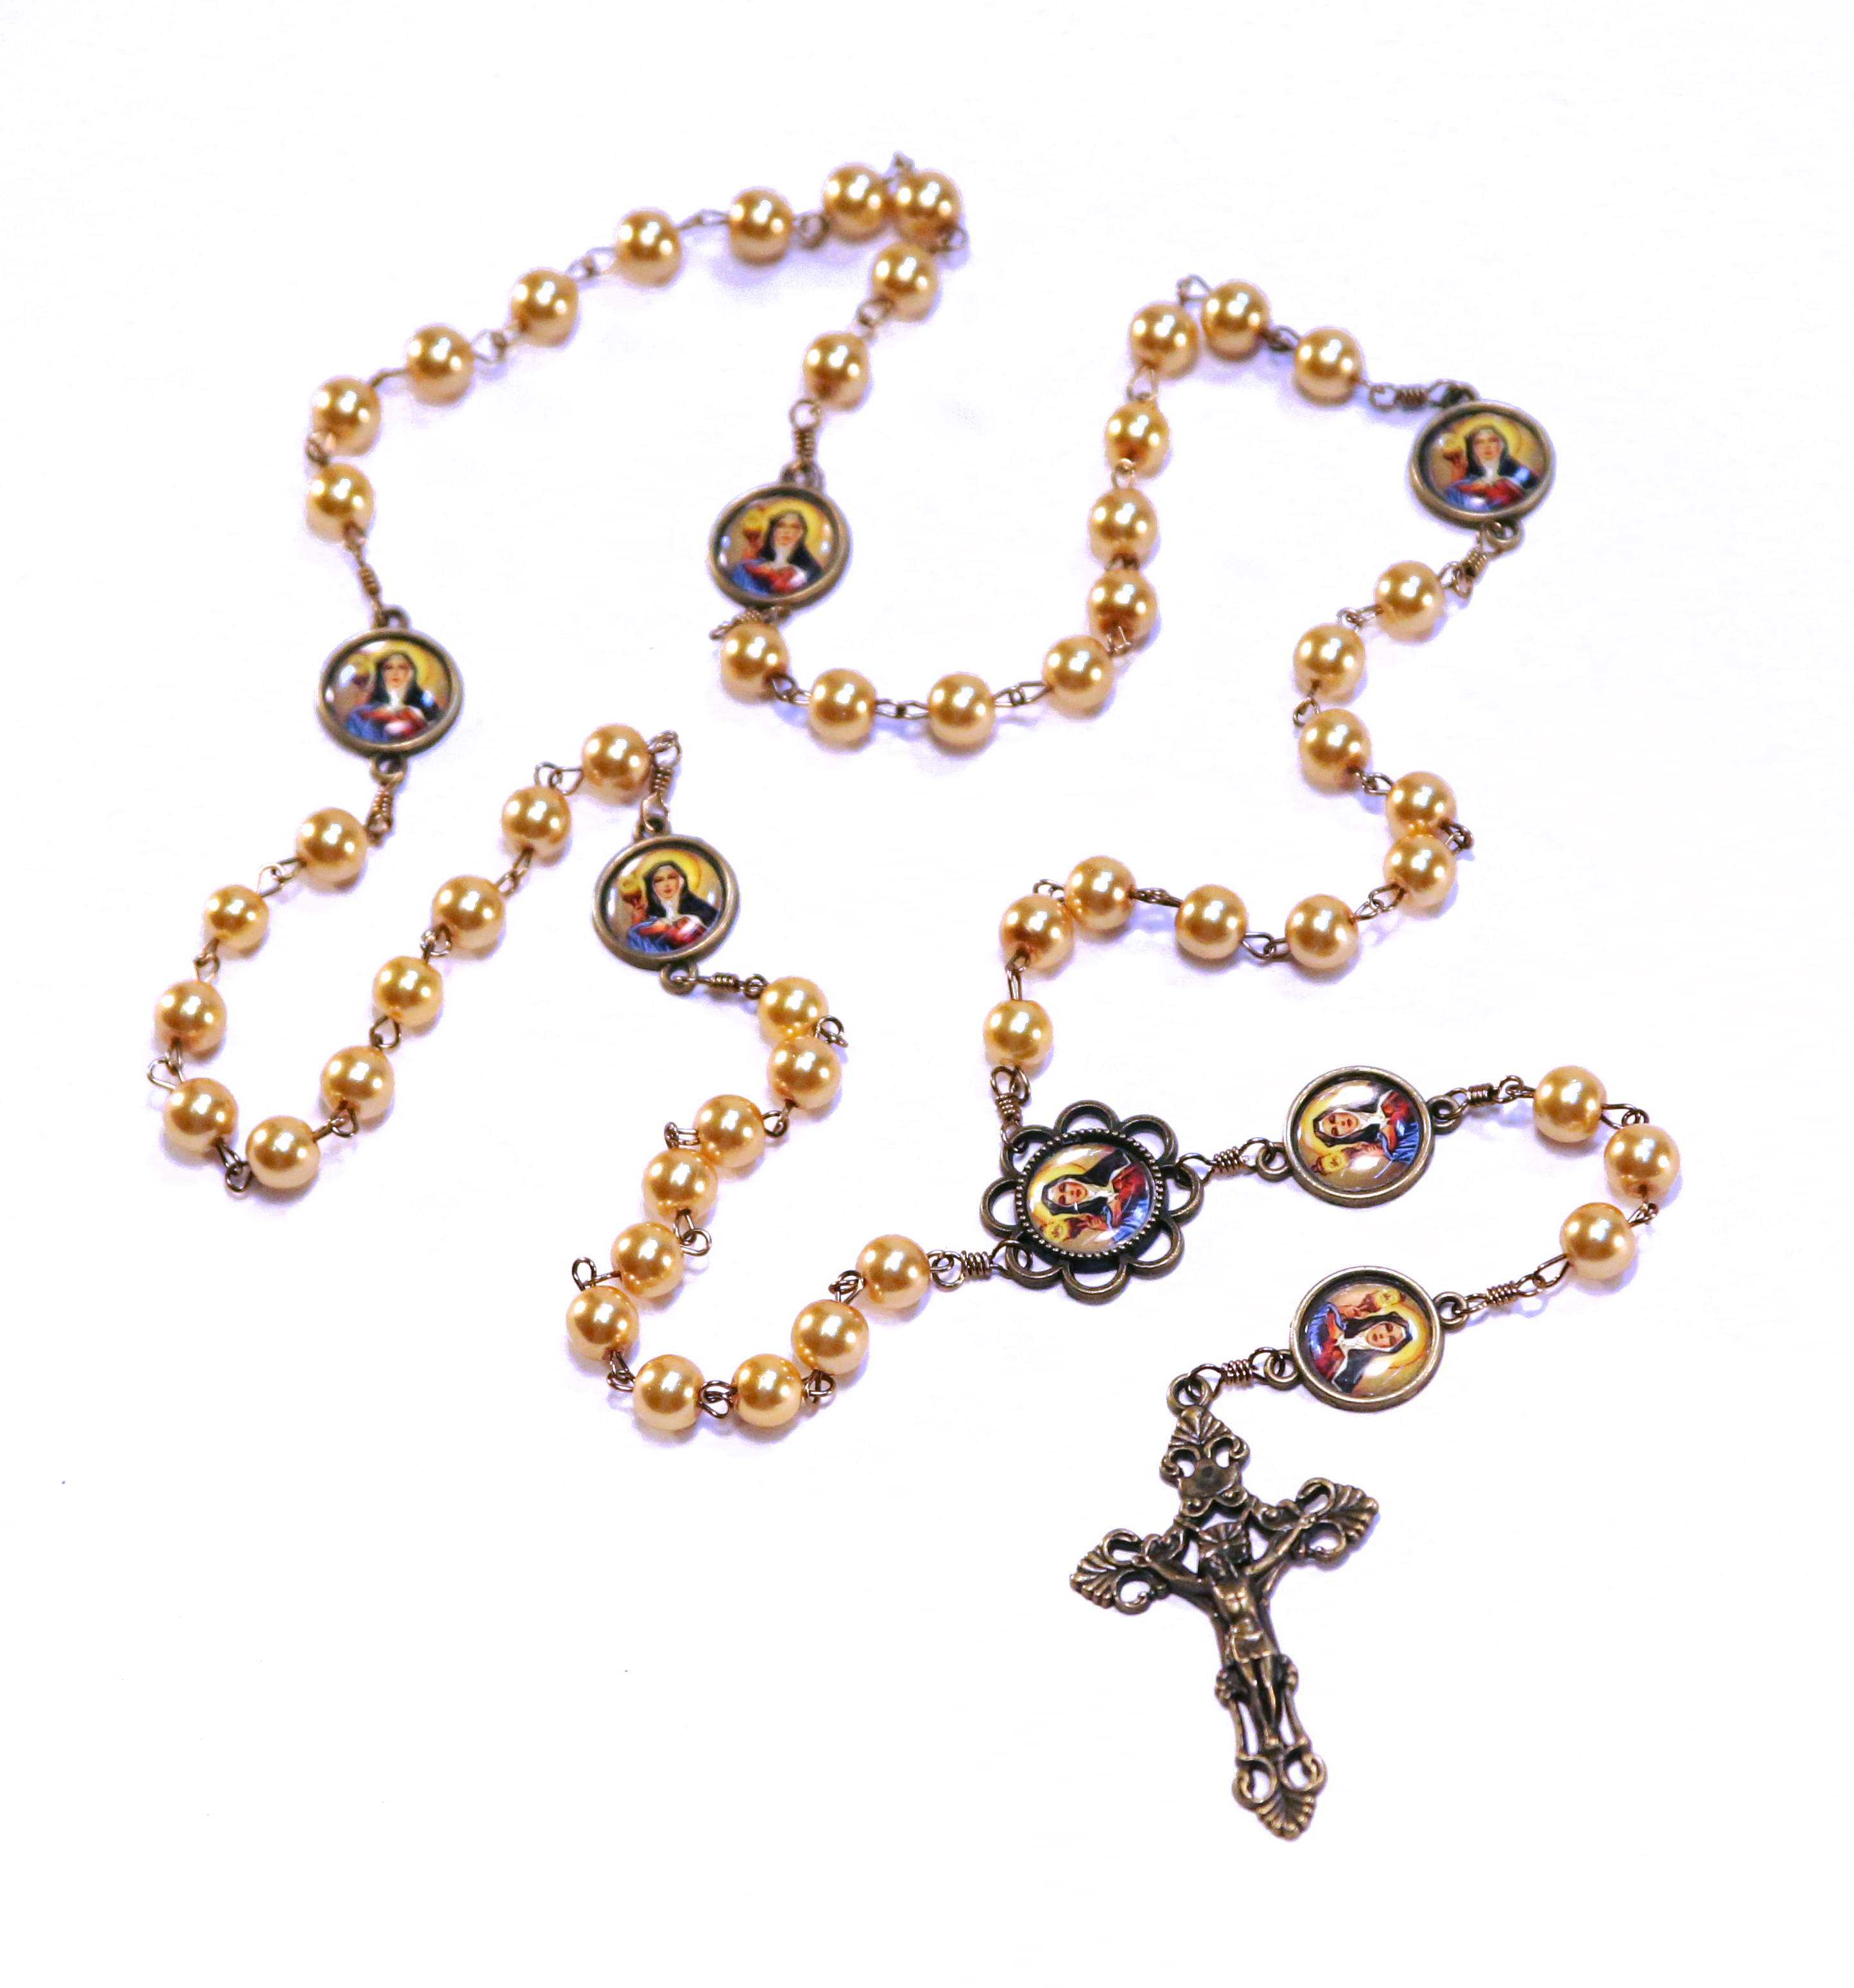 St. Claire Vintage Art Yellow Pearl Rosary with Filigree Crucifix by Shannon